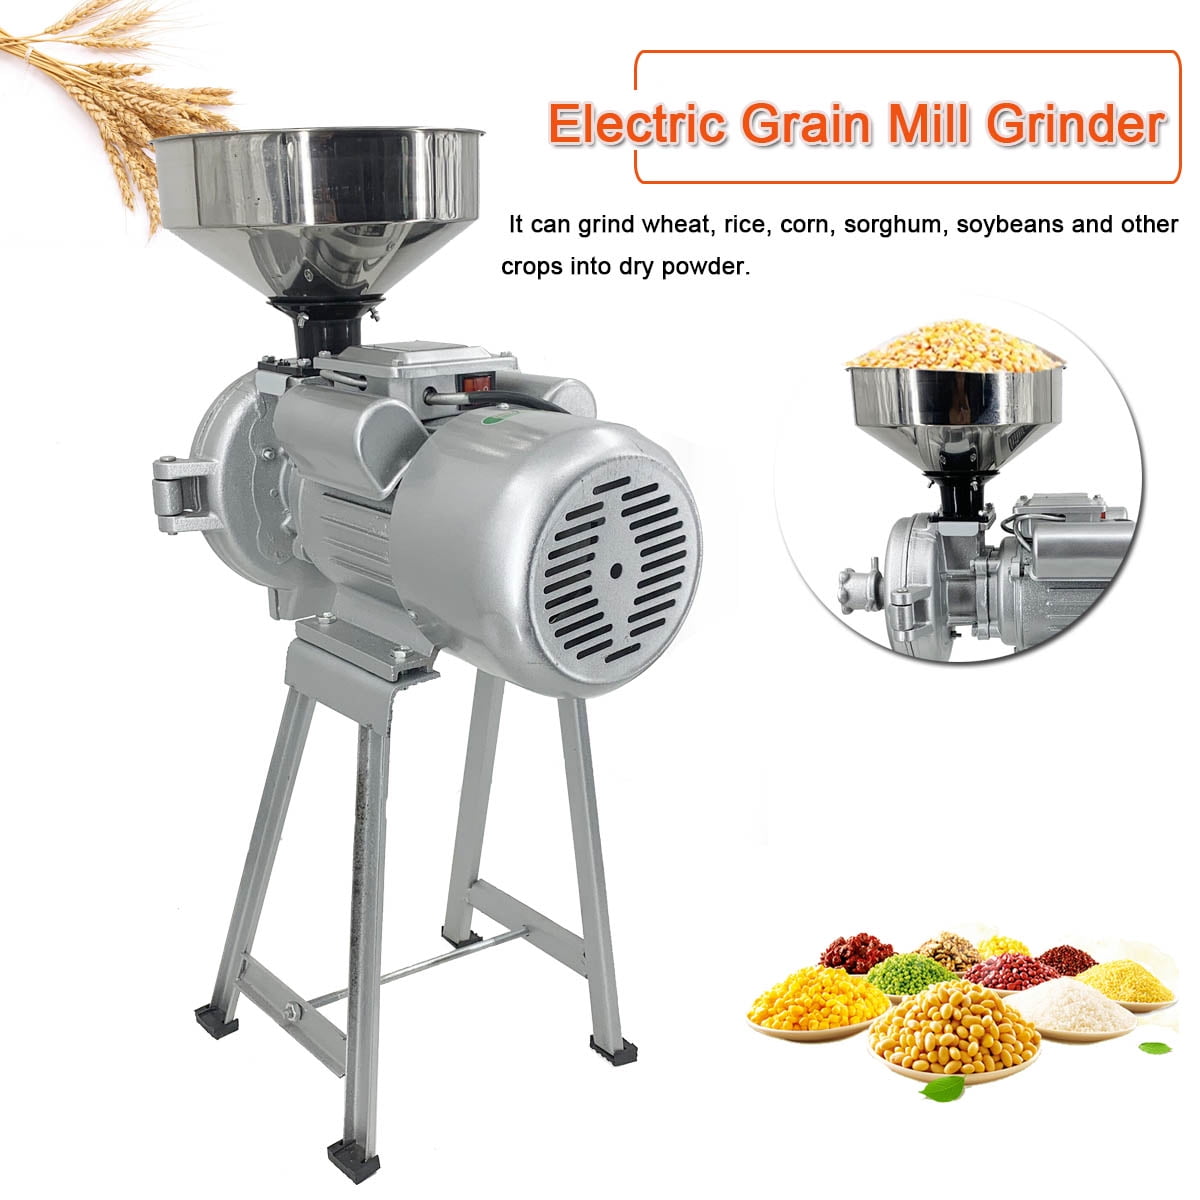 220V 1500W Grain Mills Electric Grain Mill Grinder with Funnel Home Mill Grinder Electric Grain Grinder Commercial Electric Feed Mill Dry Cereals Grinder Corn Grain Coffee Wheat Feed Machine 